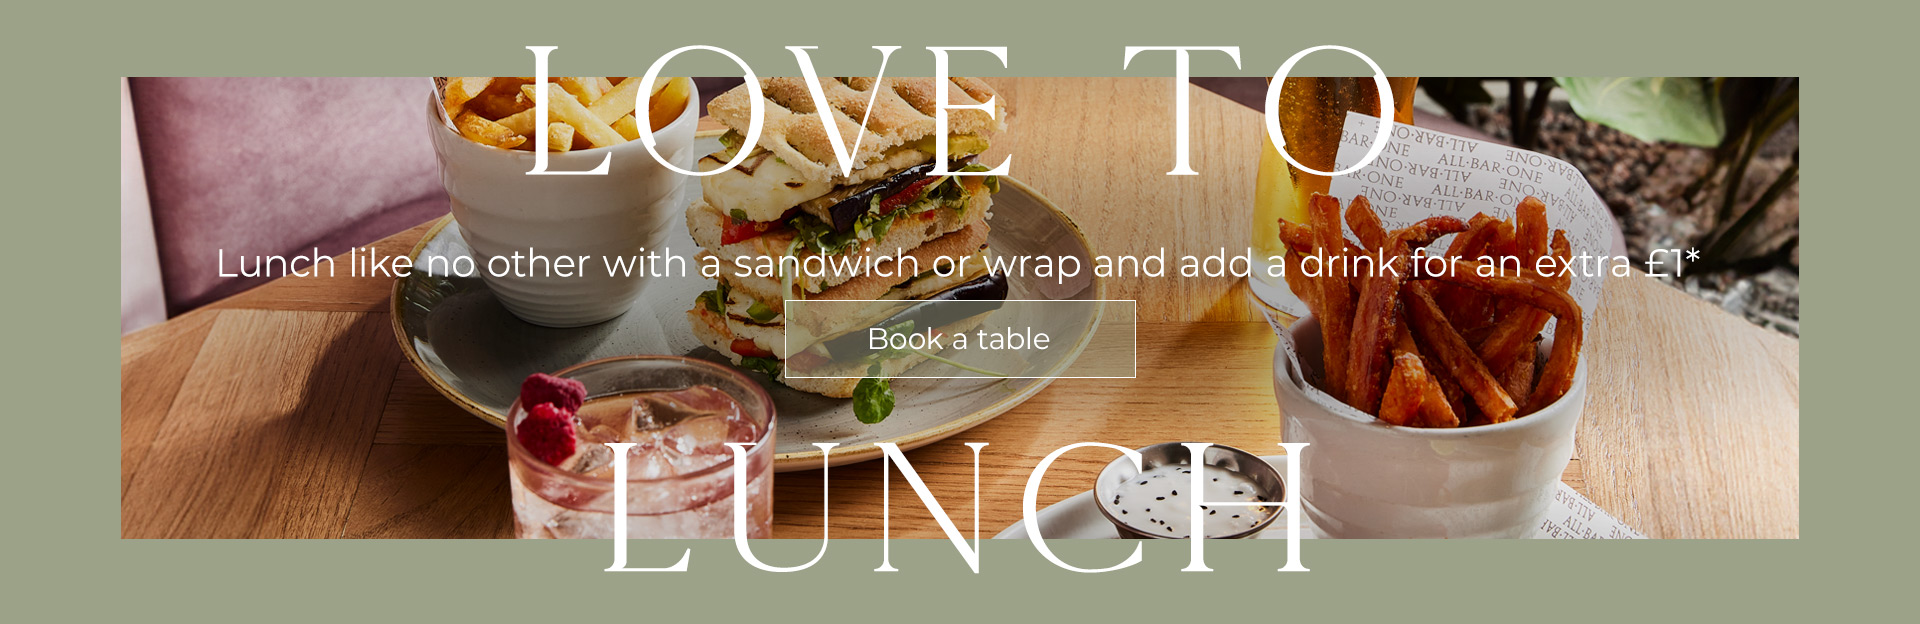 Lunch Offer at All Bar One Newcastle